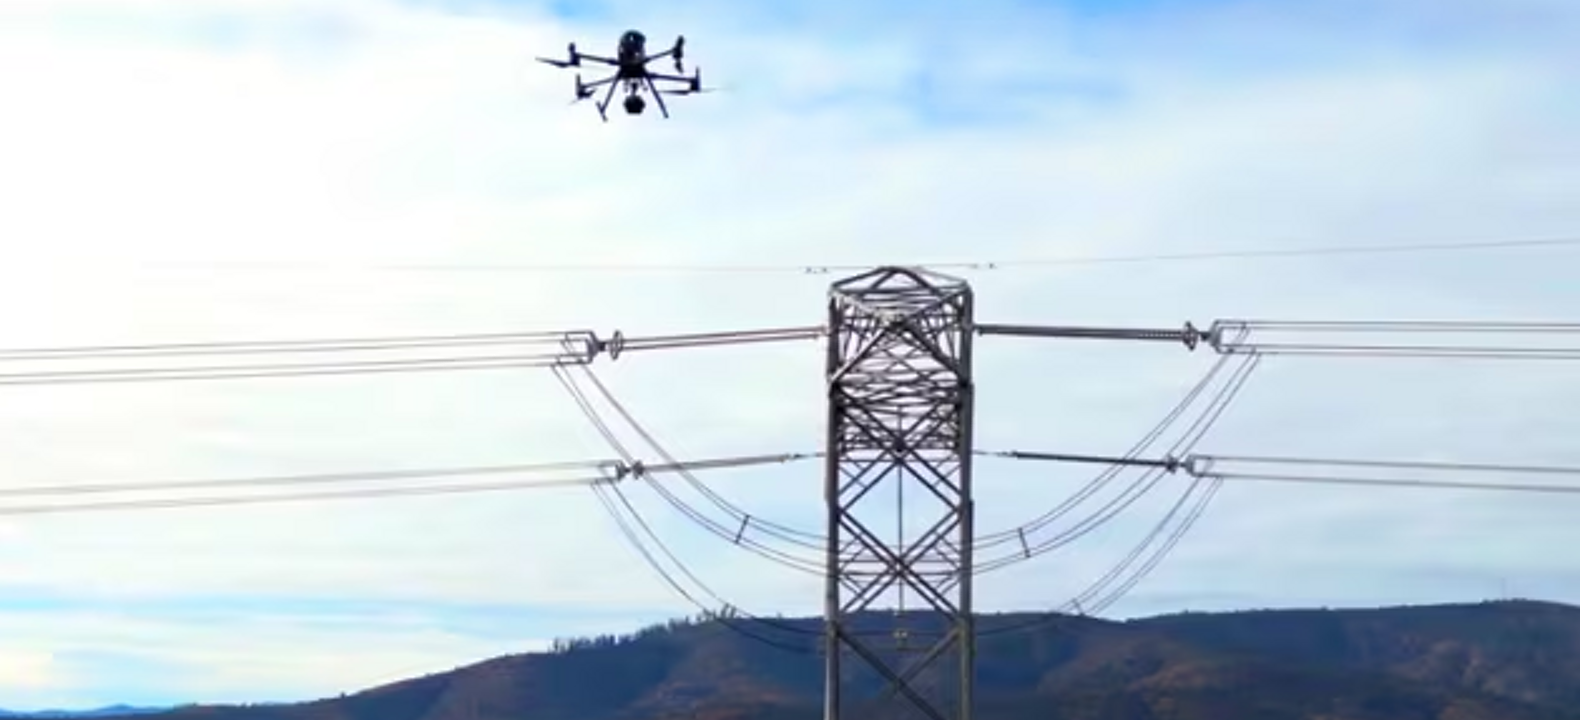 A connected drone hovers over a power-line pylon, using computer vision to help inspect the energy infrastructure.